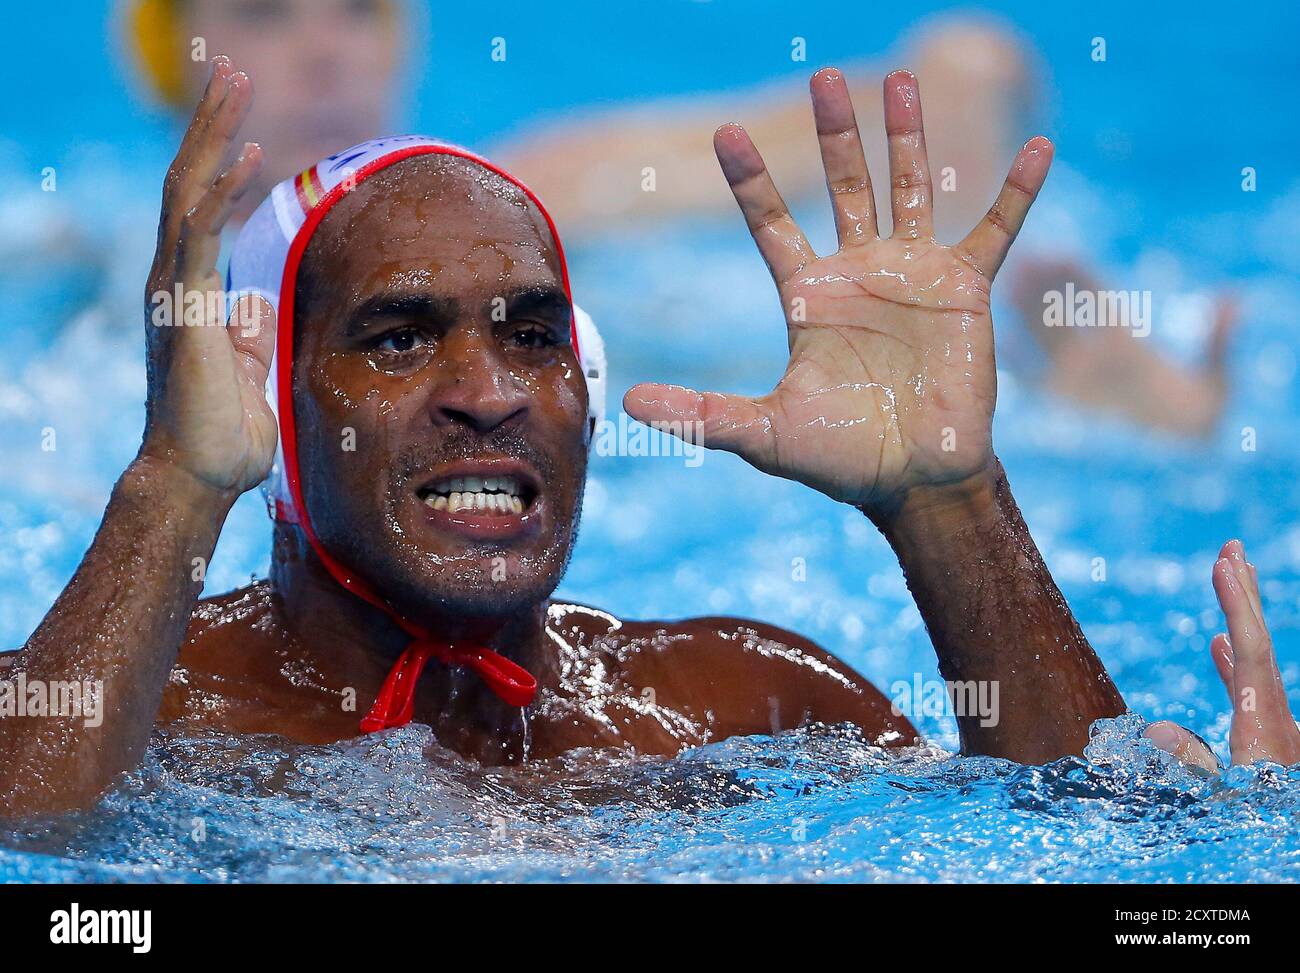 Spain's Ivan Perez Varga reacts during their men's preliminary round Group  A water polo match against Australia at the London 2012 Olympic Games at  the Water Polo Arena August 2, 2012. REUTERS/Laszlo